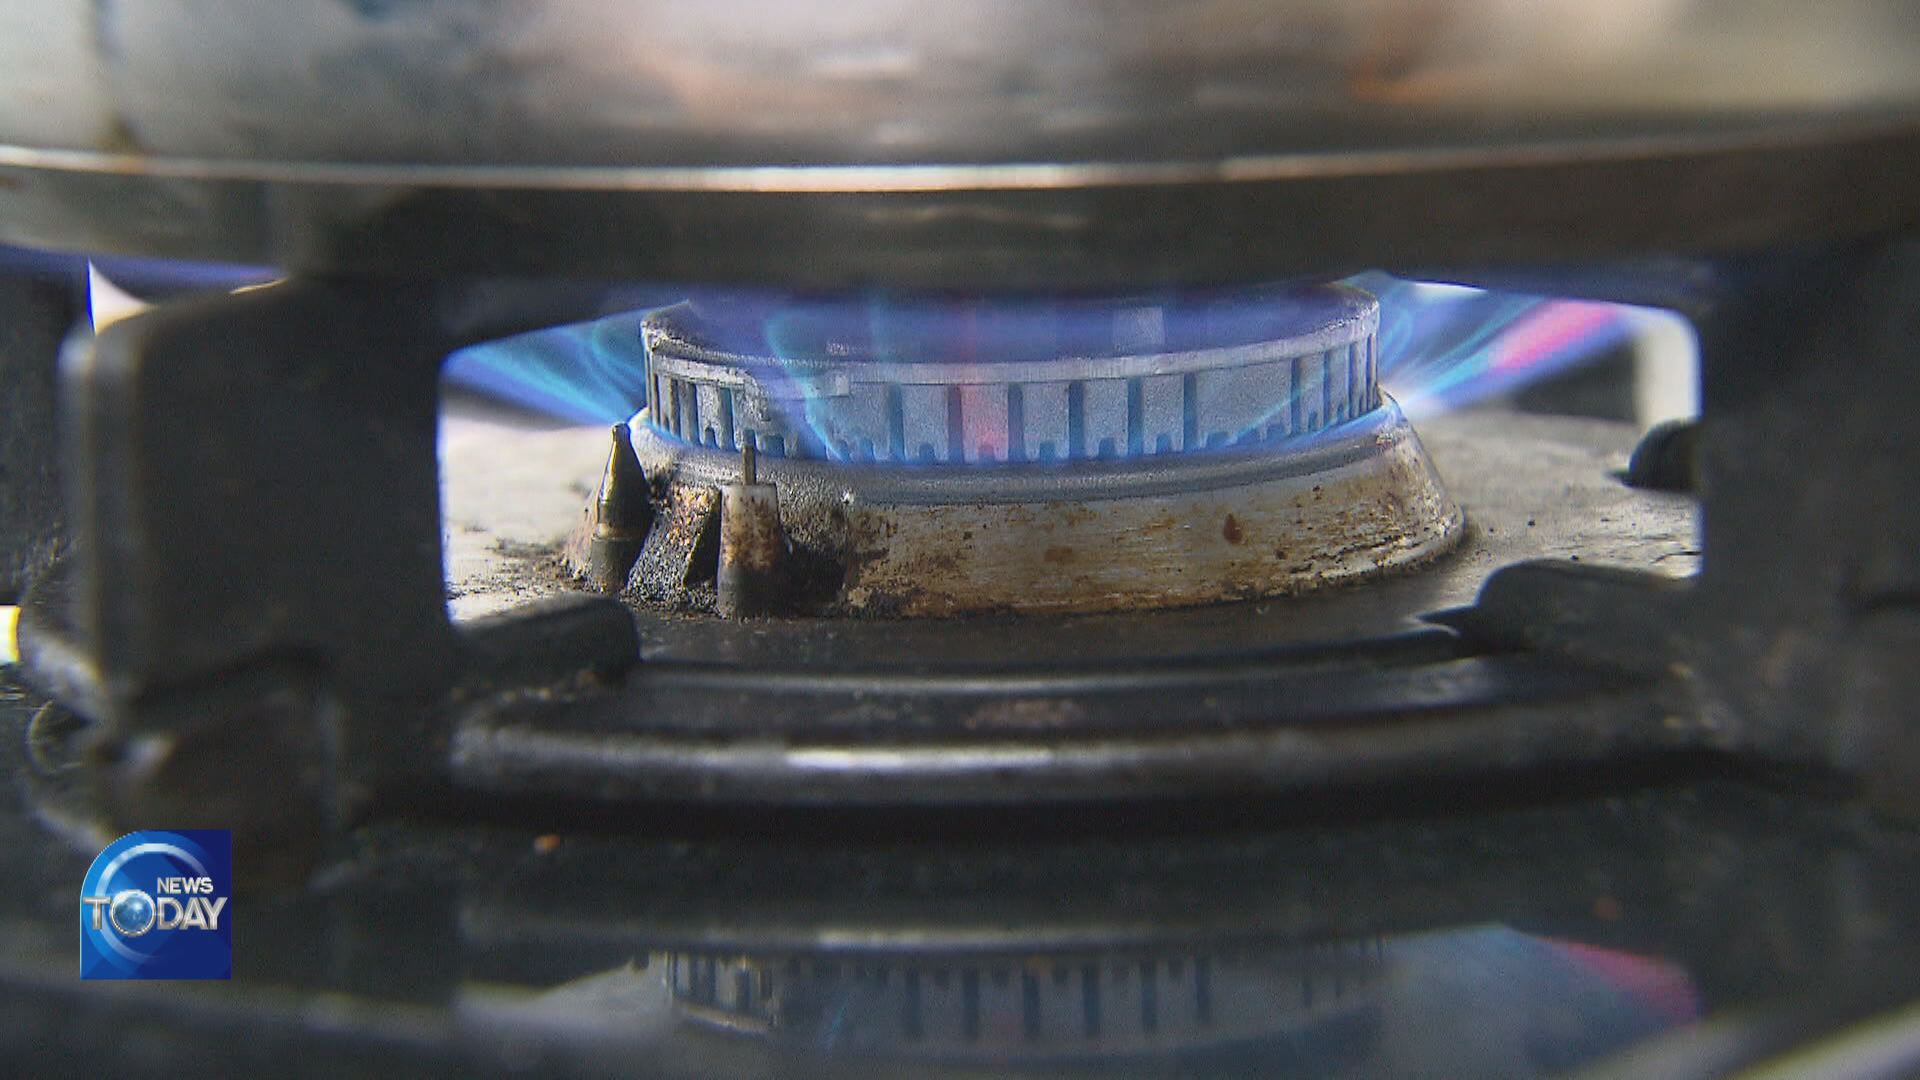 PARTIES ARGUE OVER SOARING HEATING BILL